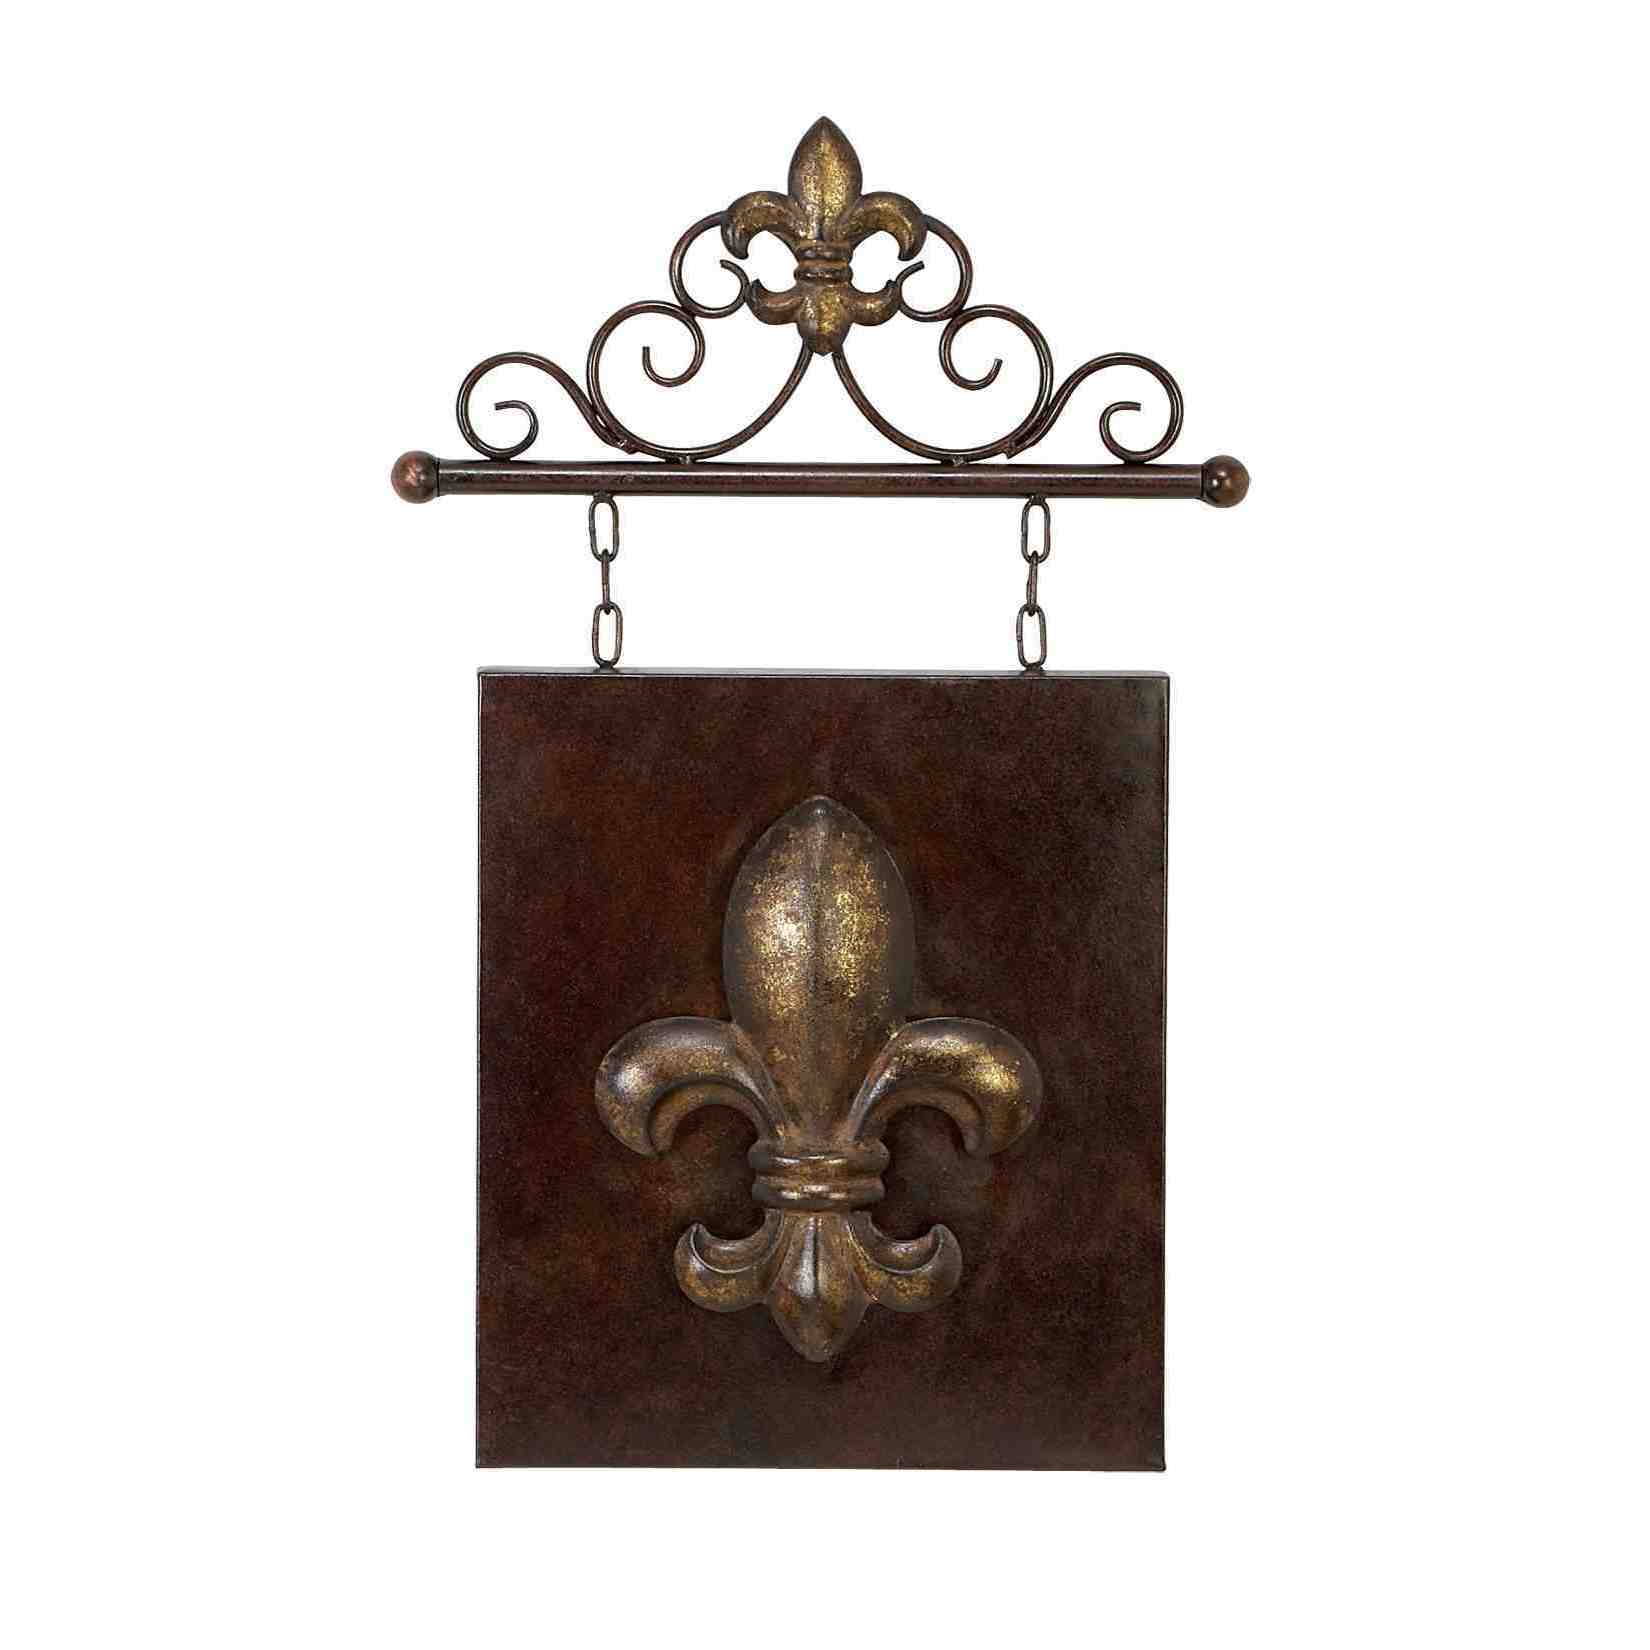 15 inch Metal Fleur de lis Wall Decor (Pewter/copperMaterial Rust free metal alloyQuantity One (1)Setting IndoorDimensions 23 inches high x 15 inches wide  Rust free metal alloyQuantity One (1)Setting IndoorDimensions 23 inches high x 15 inches wid